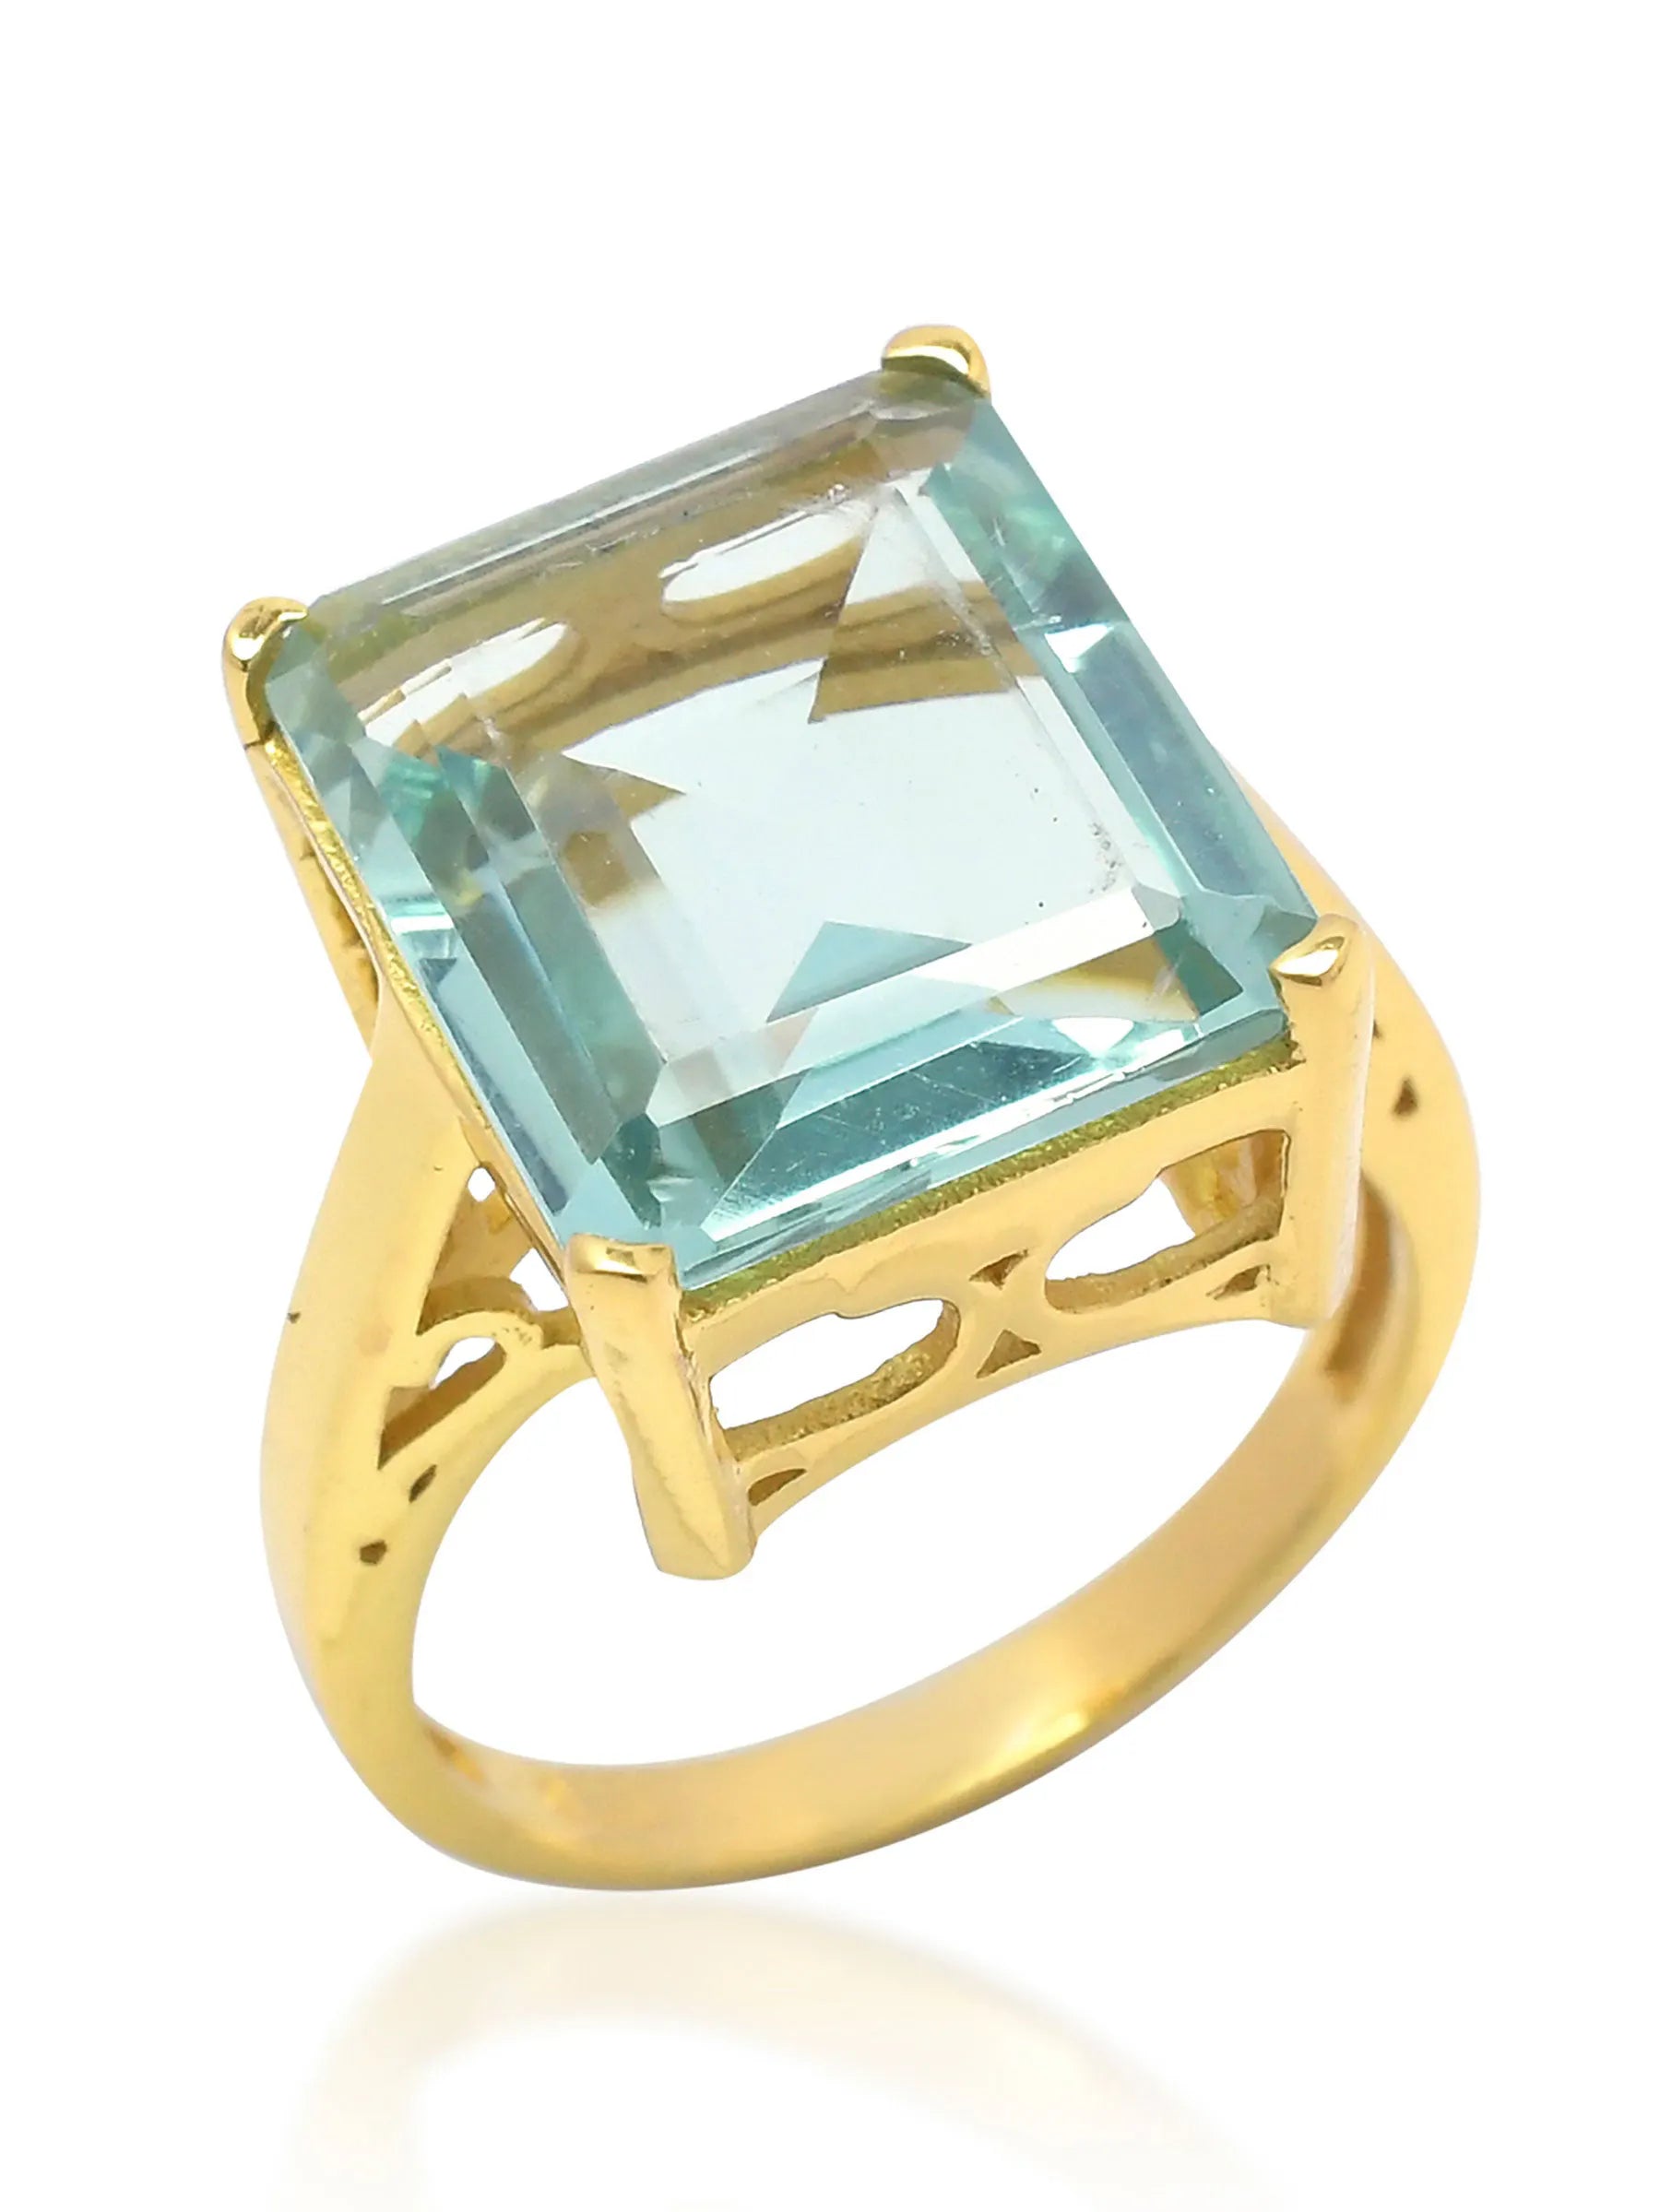 The SHYLA - Claudia Ring - Gold from Shyla features a vibrant aqua topaz, set in lustrous yellow gold, for a stunning and colorful vintage look.